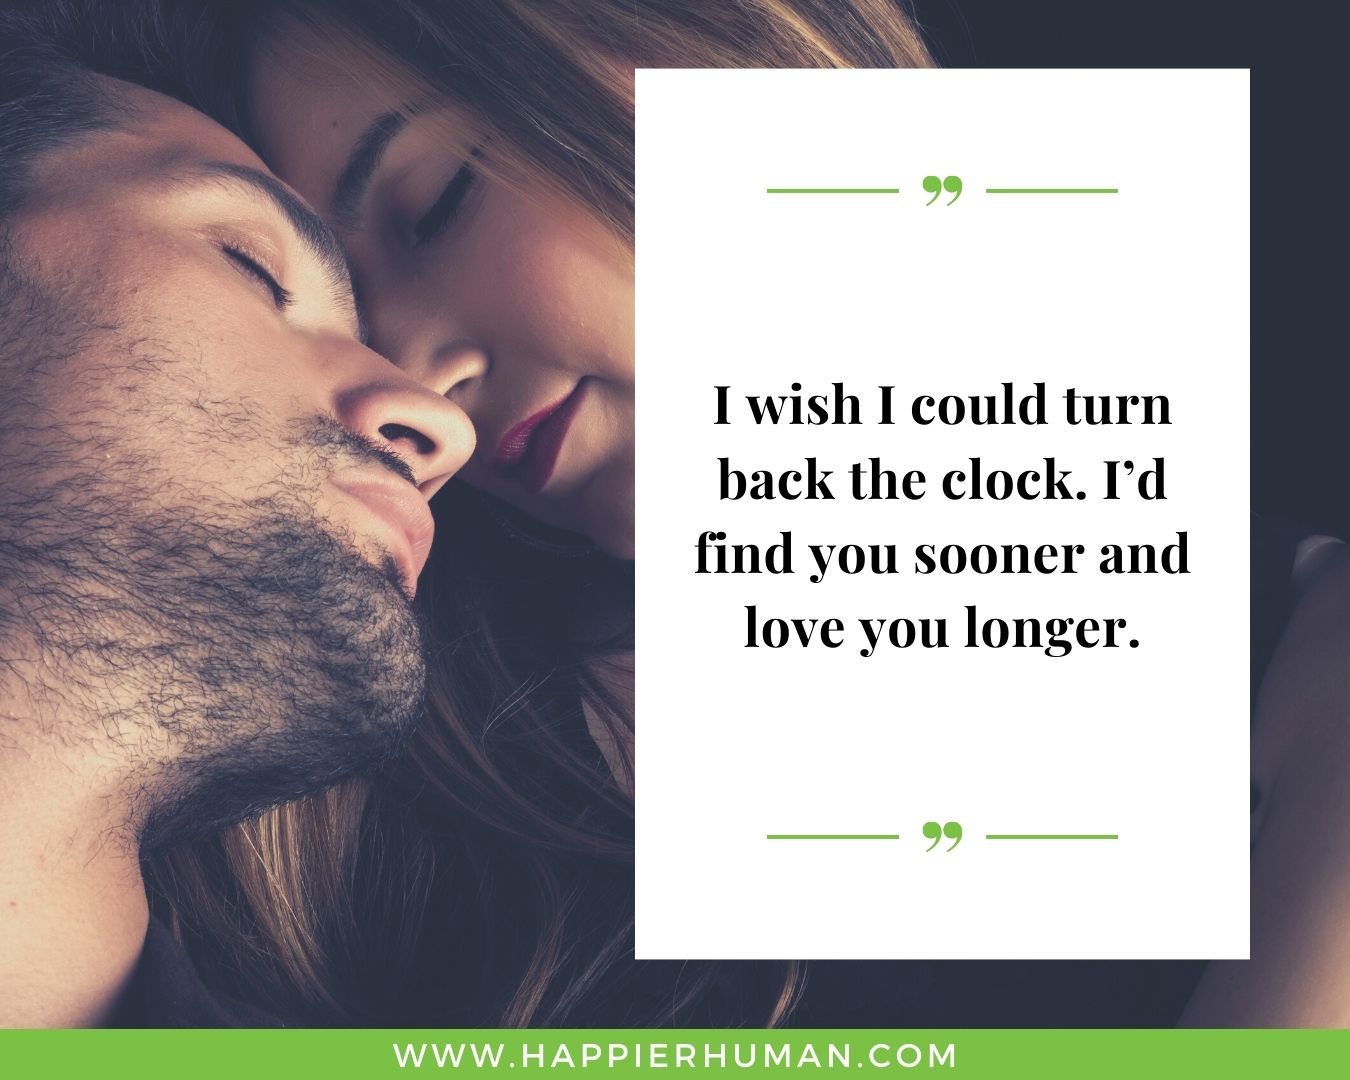 funny love quotes for husband